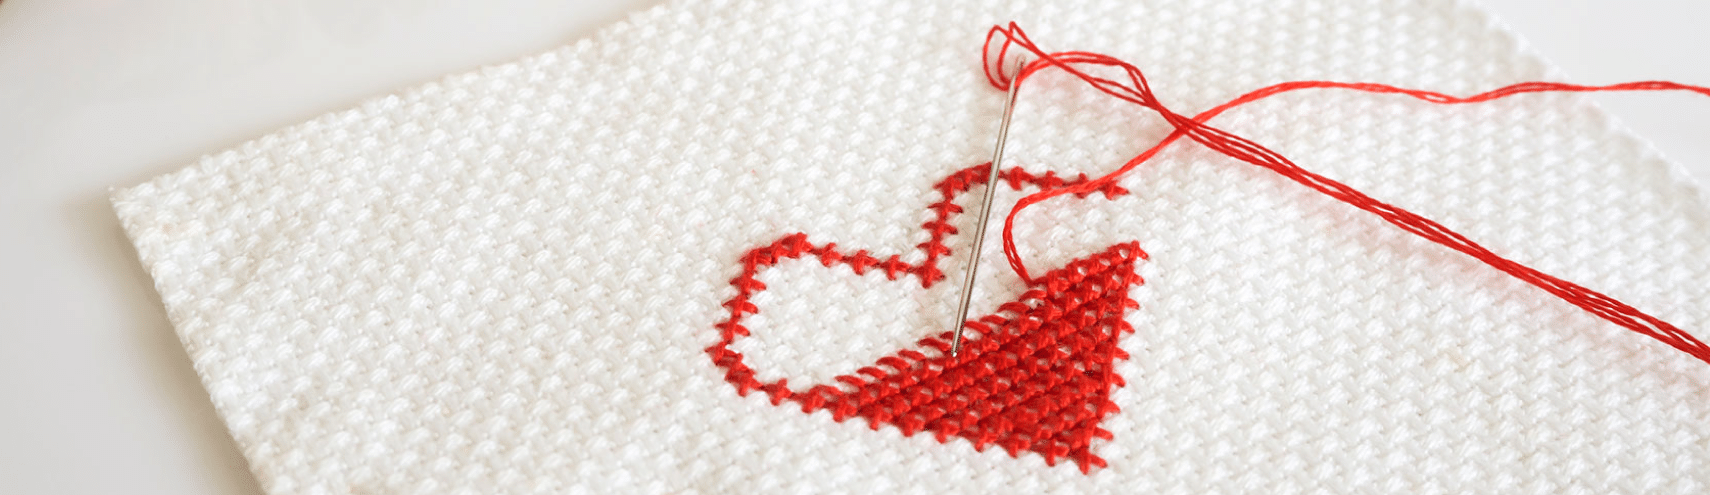 Stitching of red heart halfway completed on a white fabric with multicolored threads behind it